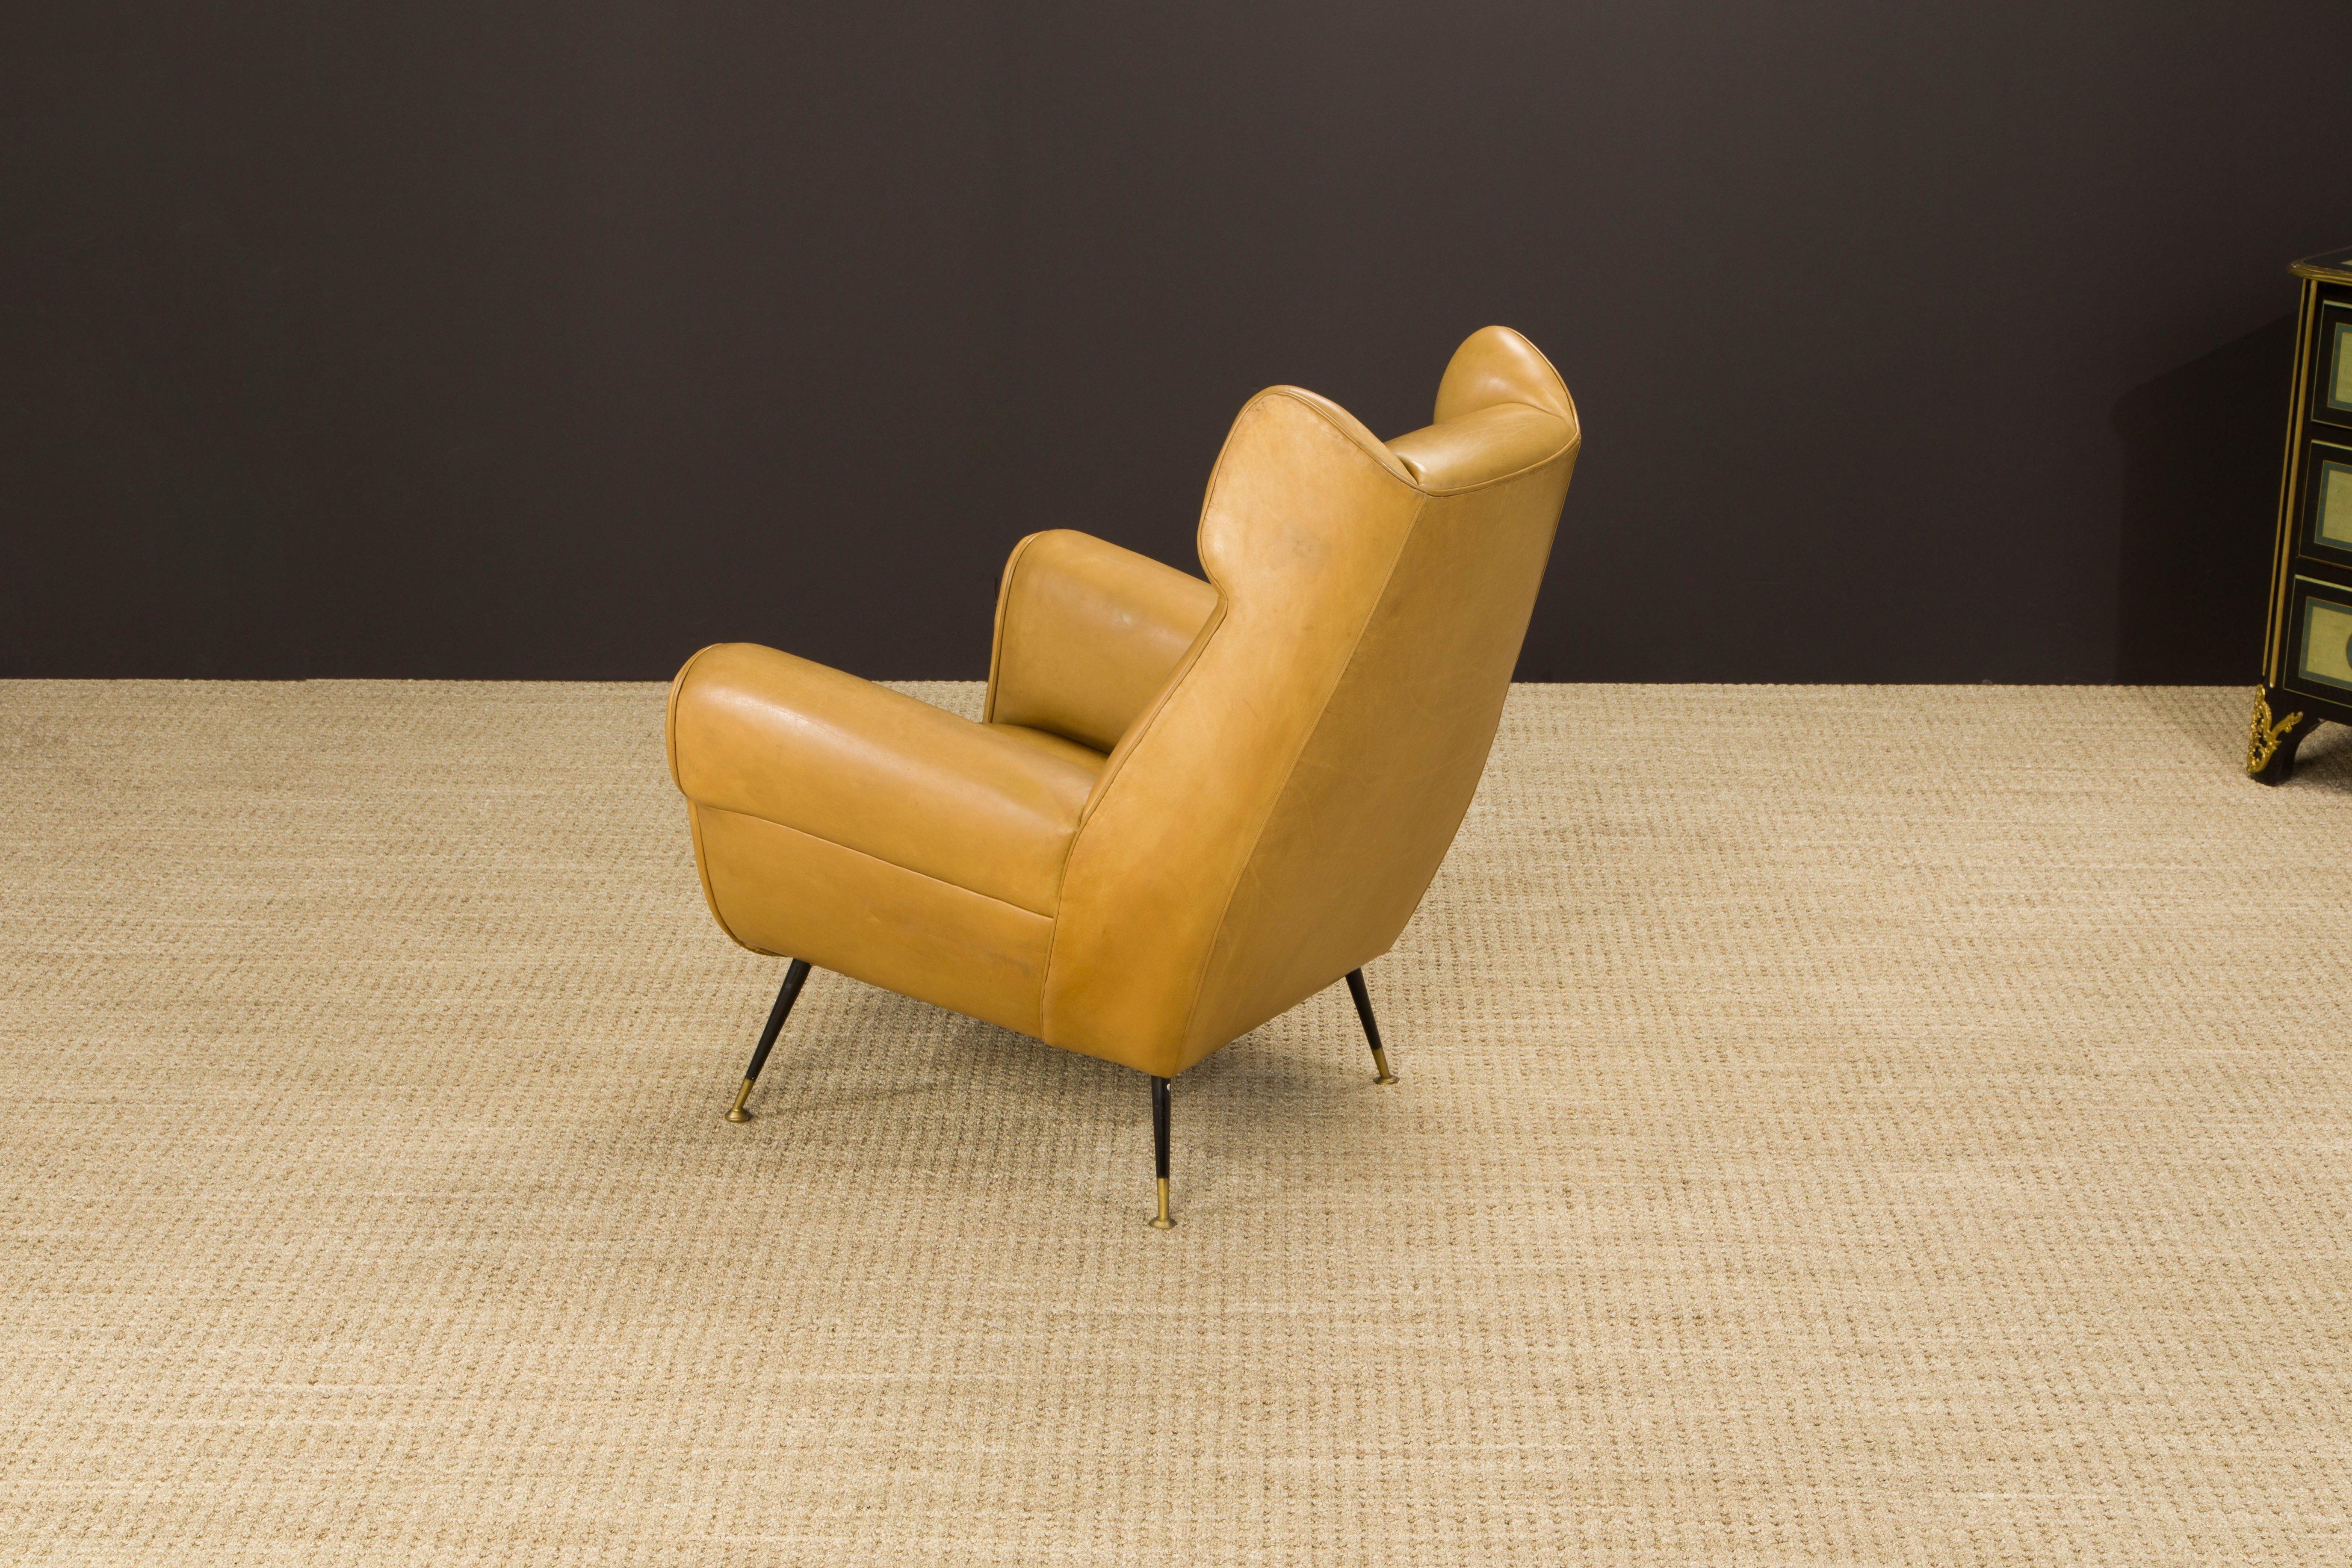 Pair of Gigi Radice for Minotti Leather Wingback Lounge Chairs, Italy, c. 1950s 5